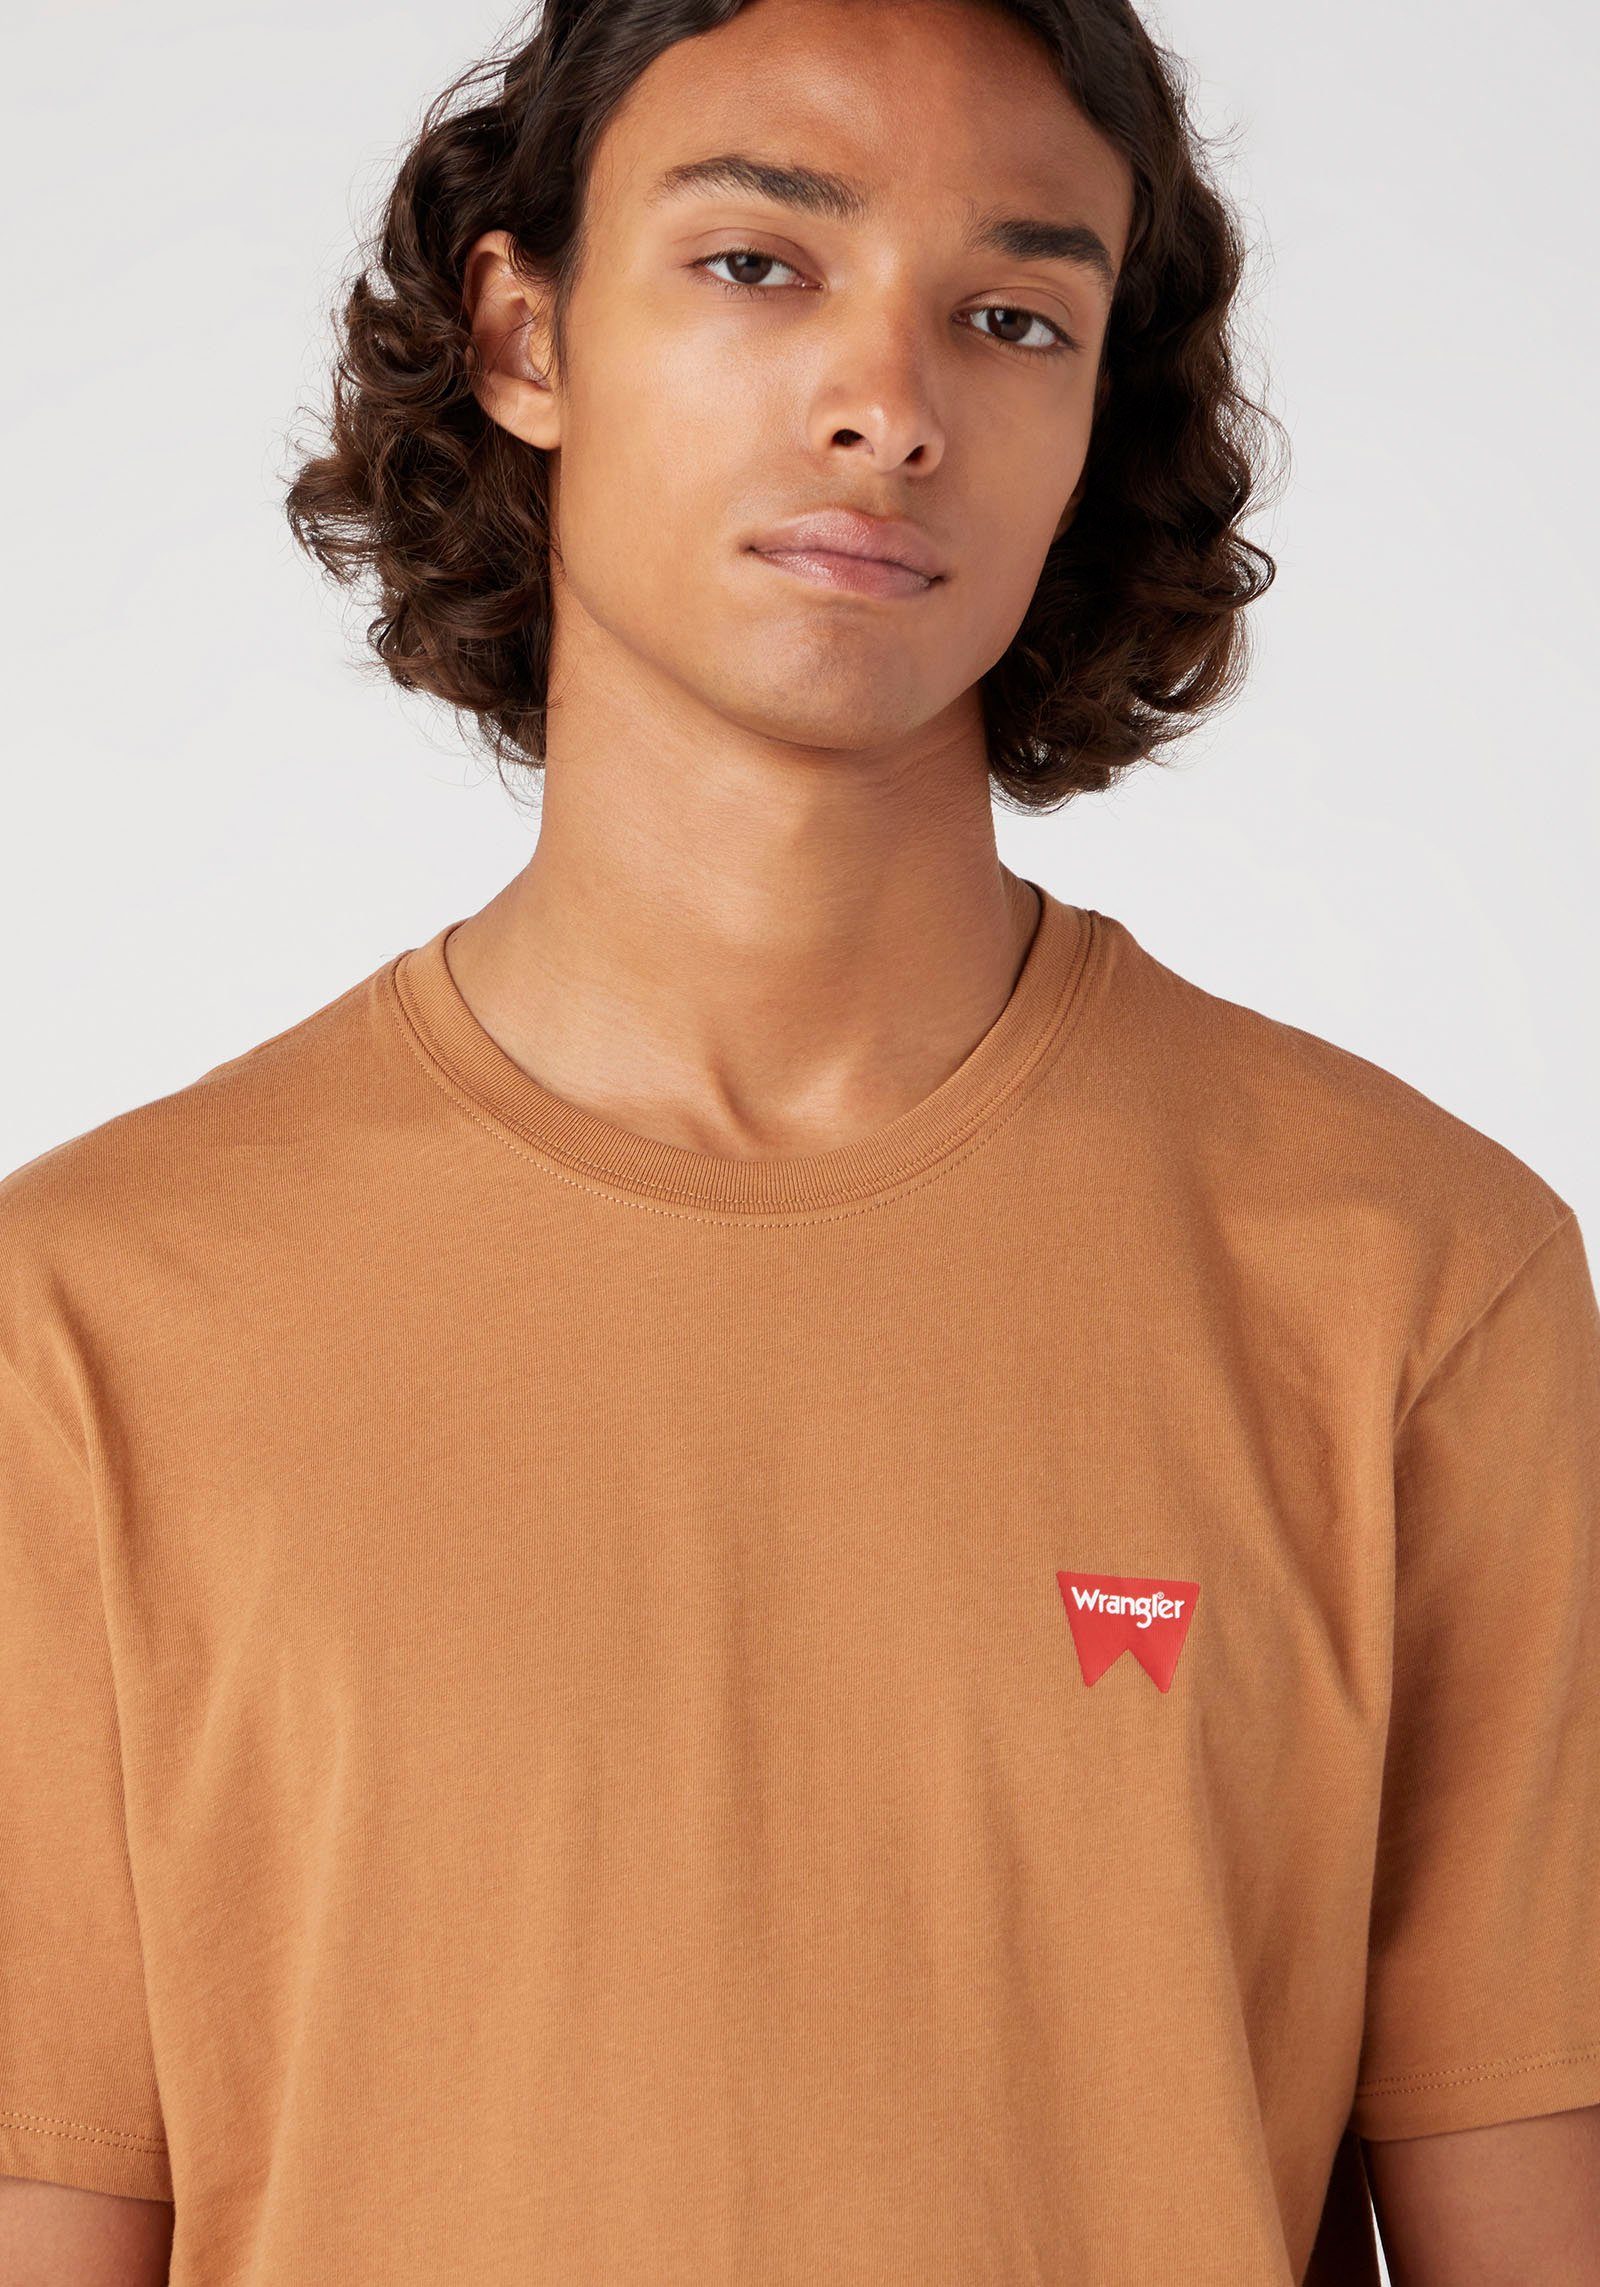 Wrangler T-Shirt Sign-Off tobacco brown